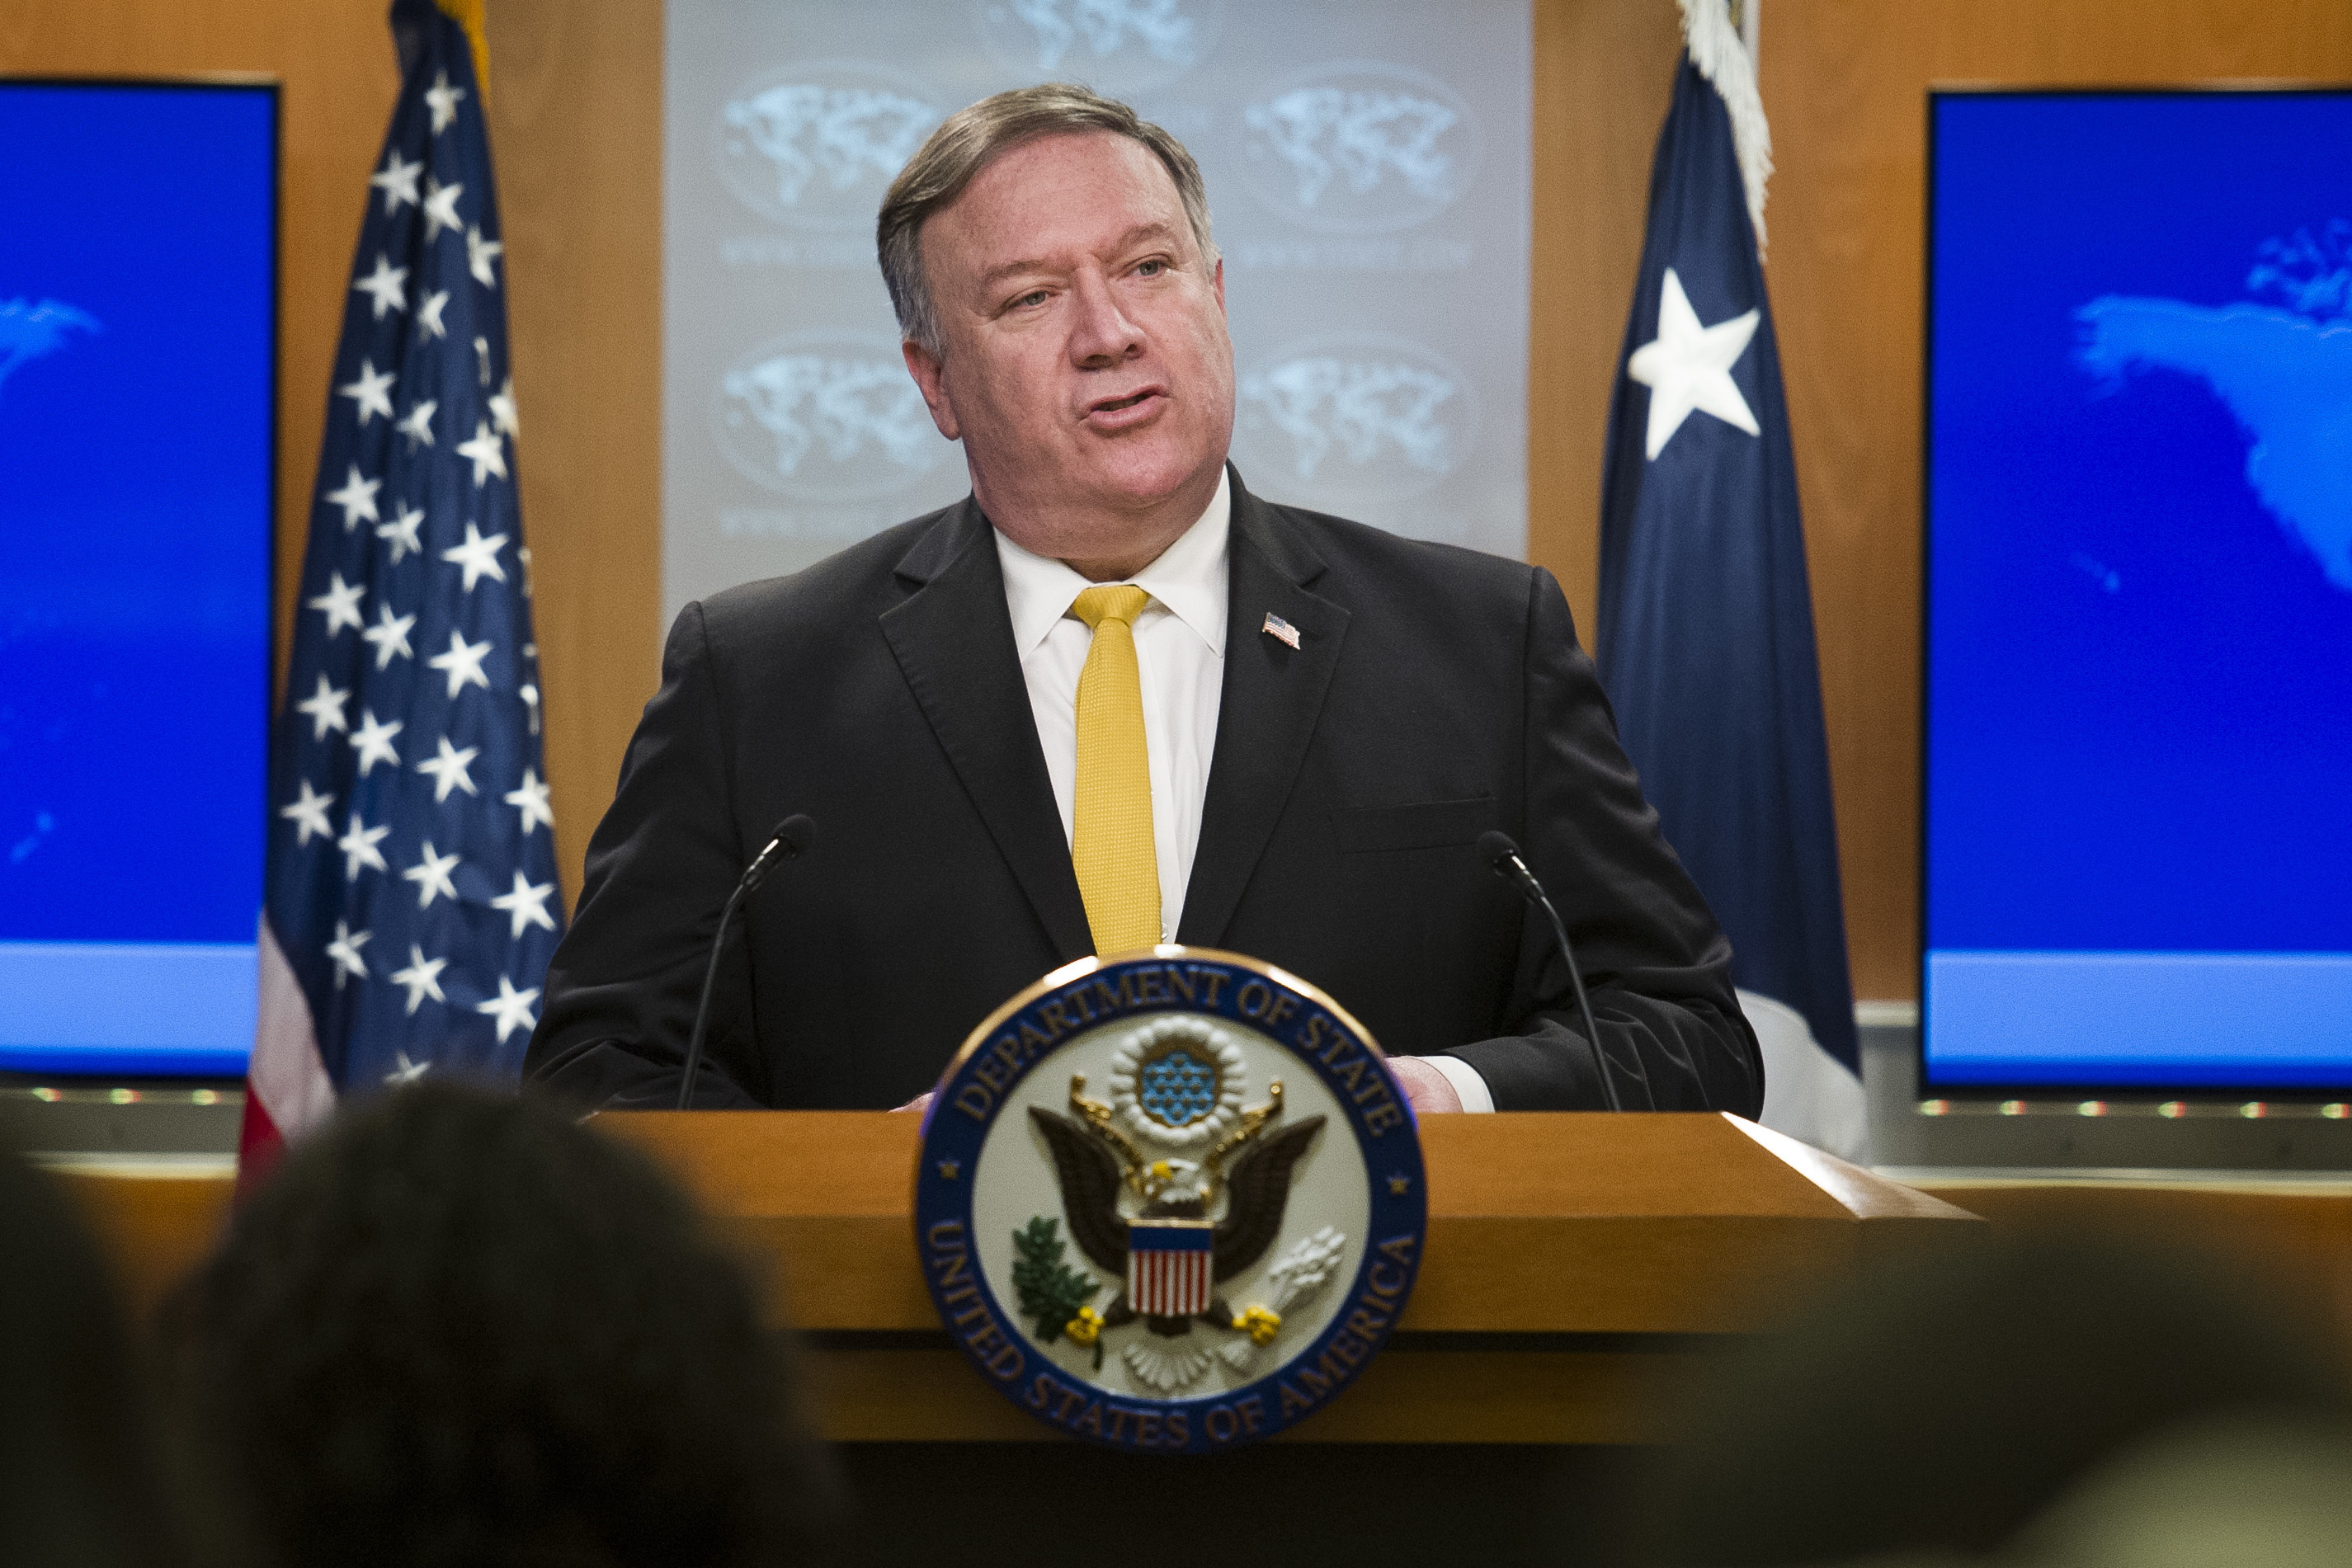 Pompeo notes Duterte’s Trump-like style, ‘2 wives’